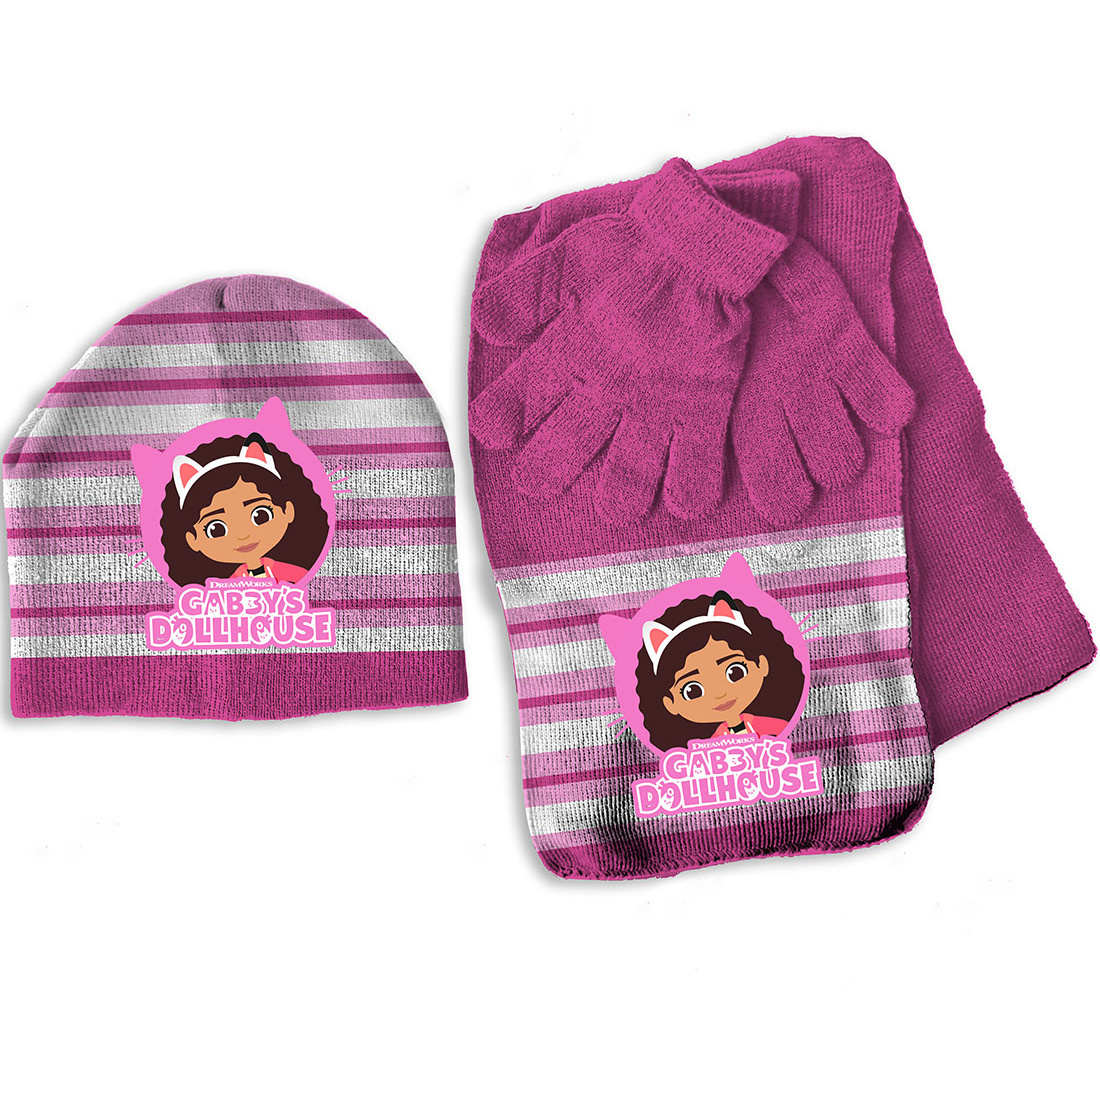 Gabby's poppenhuis Hat, scarf and gloves set, Pink - ONE SIZE 3-6 yrs - Acrylic / Elastane